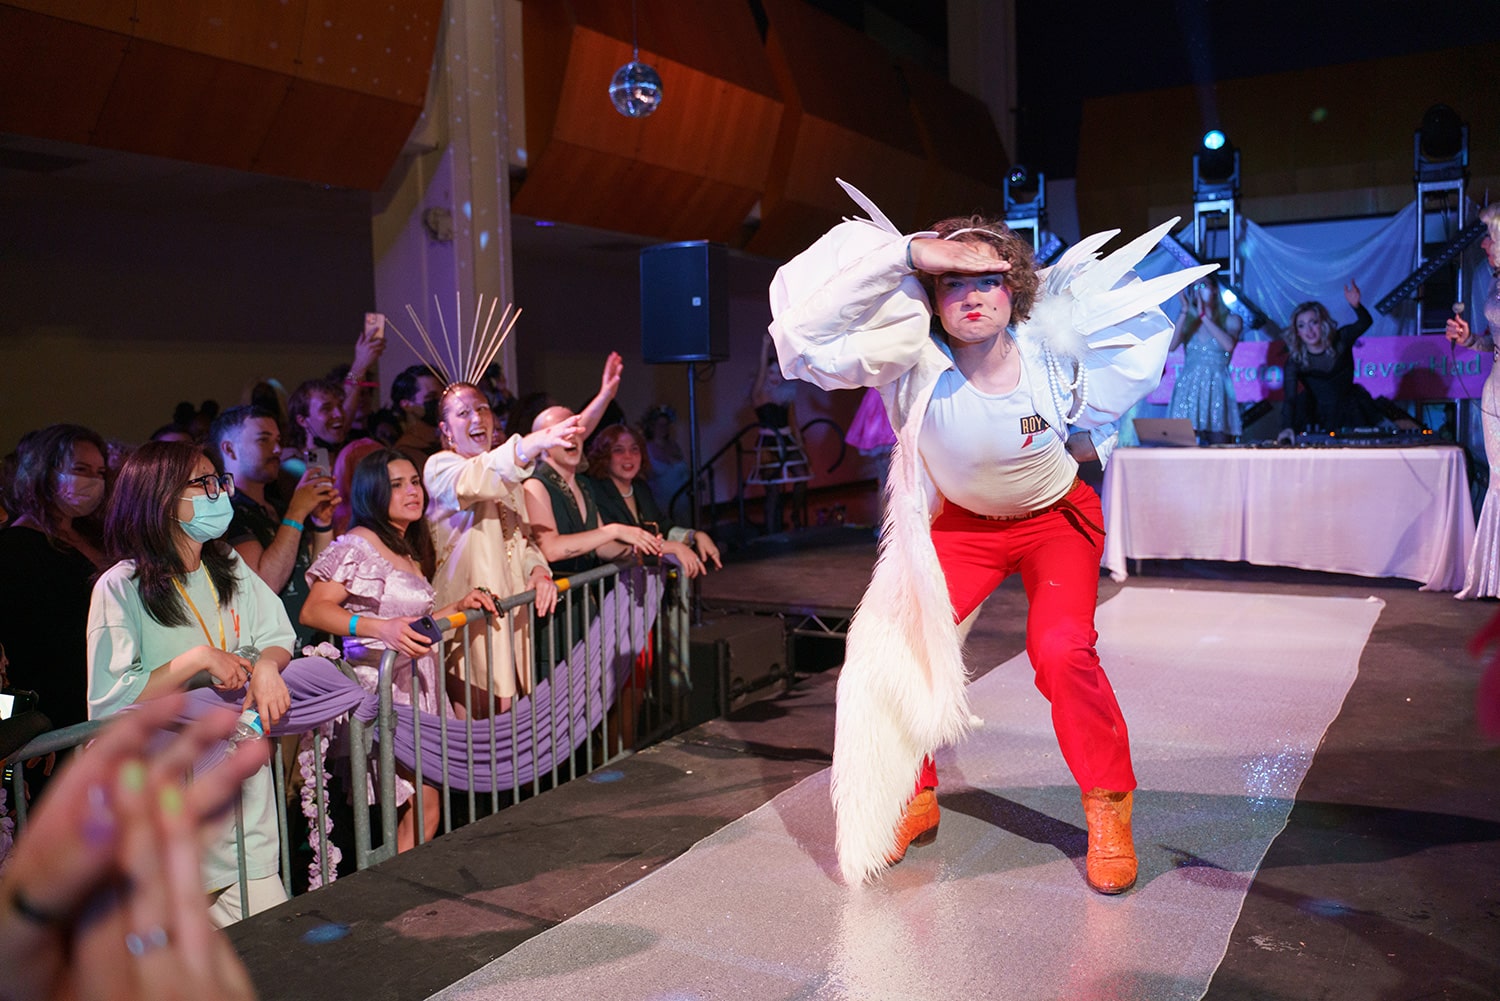 Person wearing wings poses on a runway in the Main Gallery.